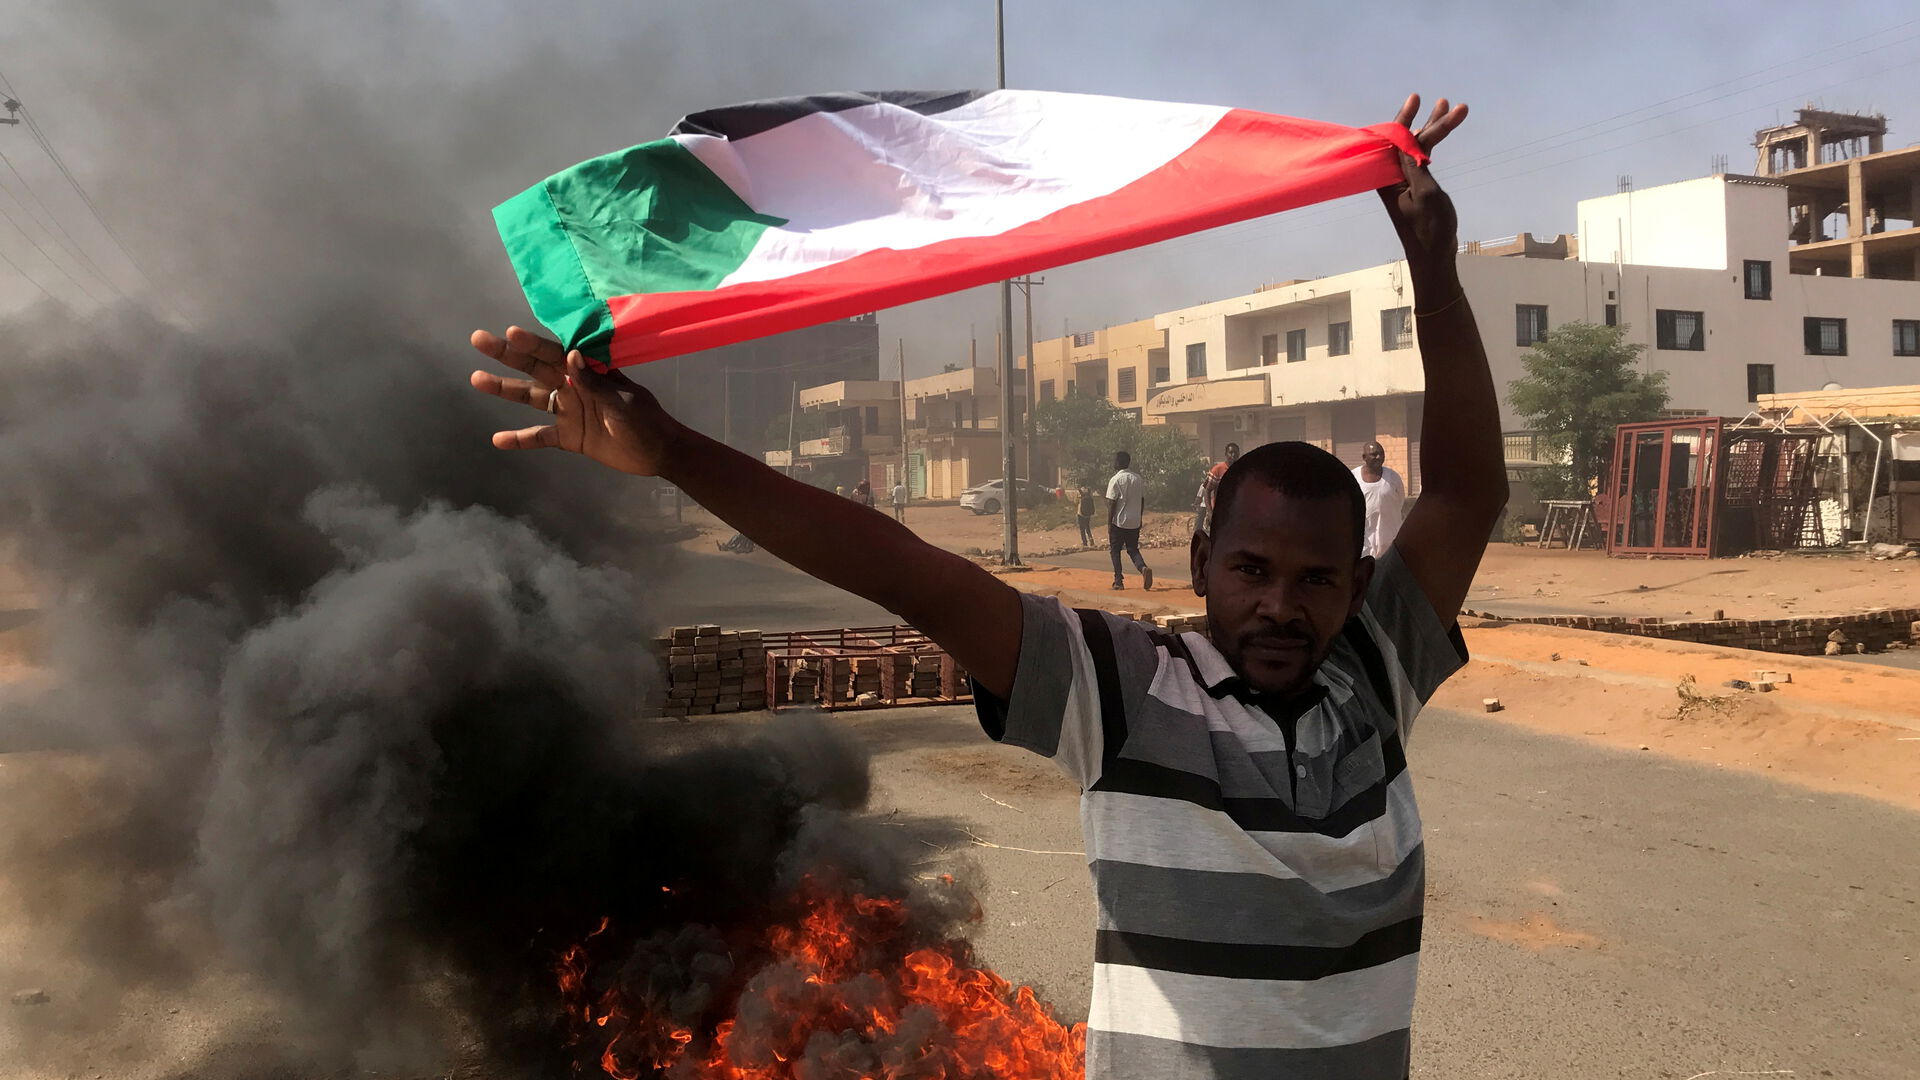 The Sudan military seized control in a coup.